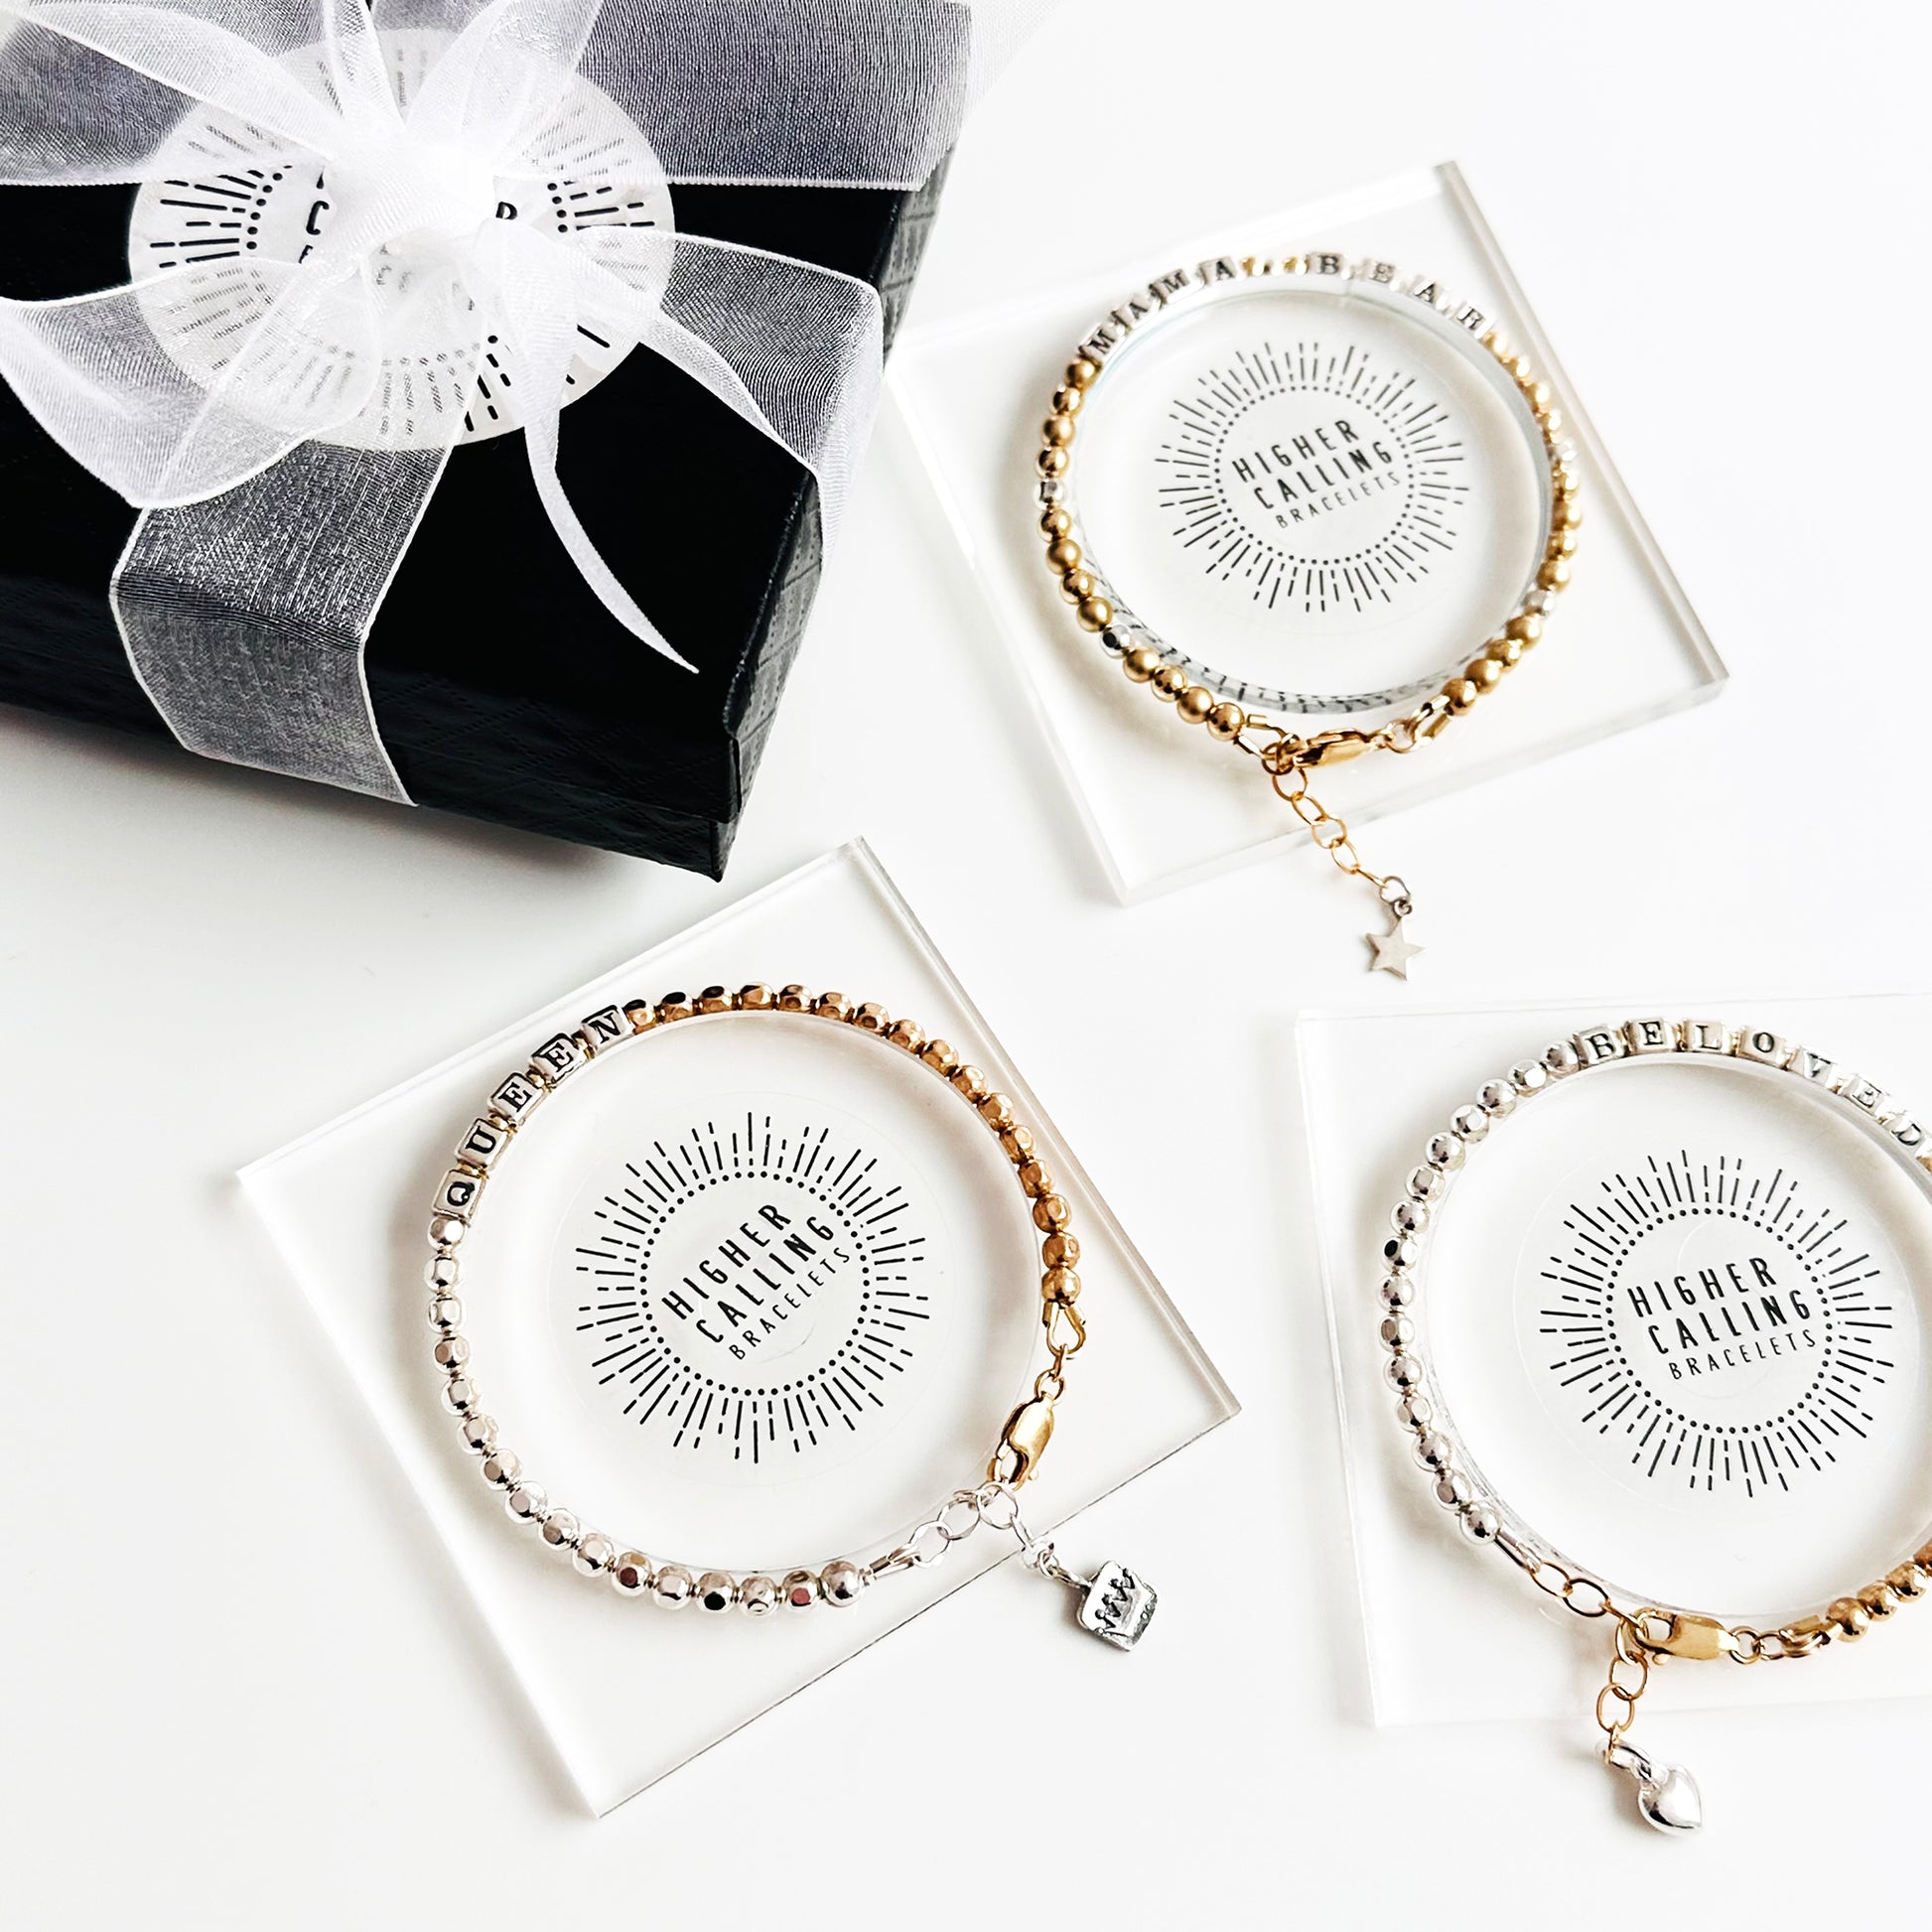 Special Mother's Day jewelry in beautiful packaging from Higher Calling Bracelets